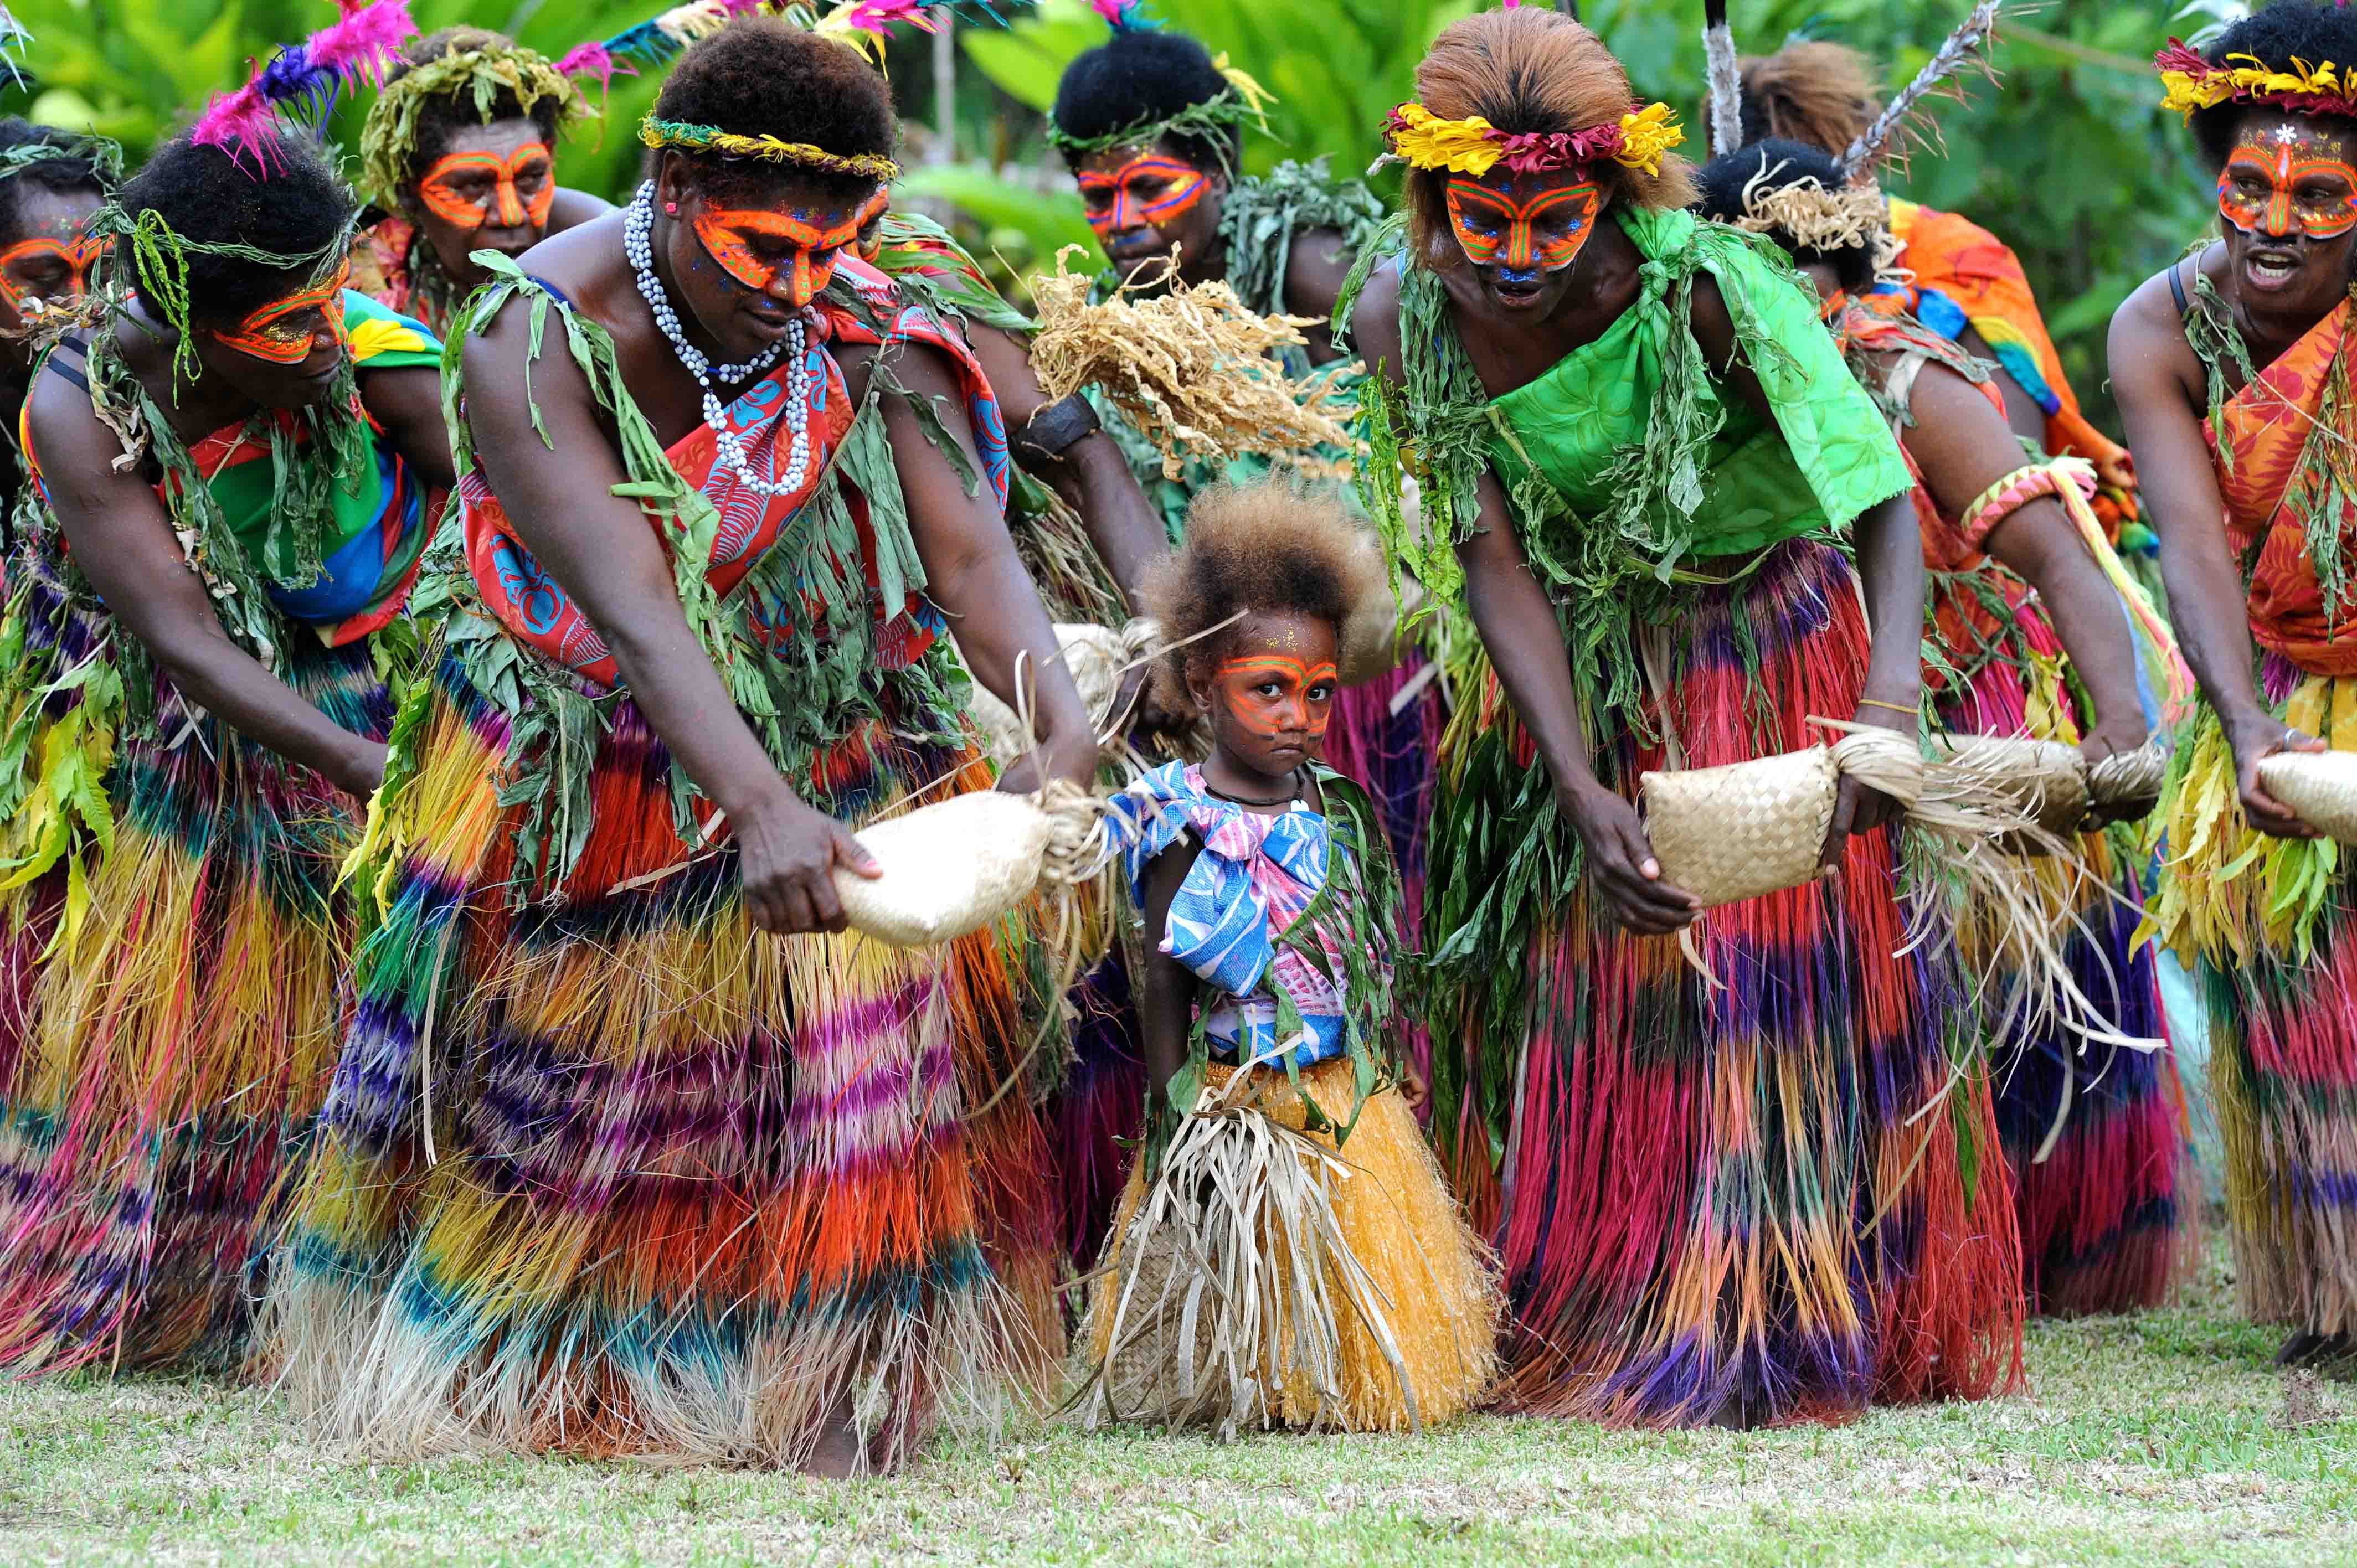 colourful dancers in colourful grass skirts with a small child